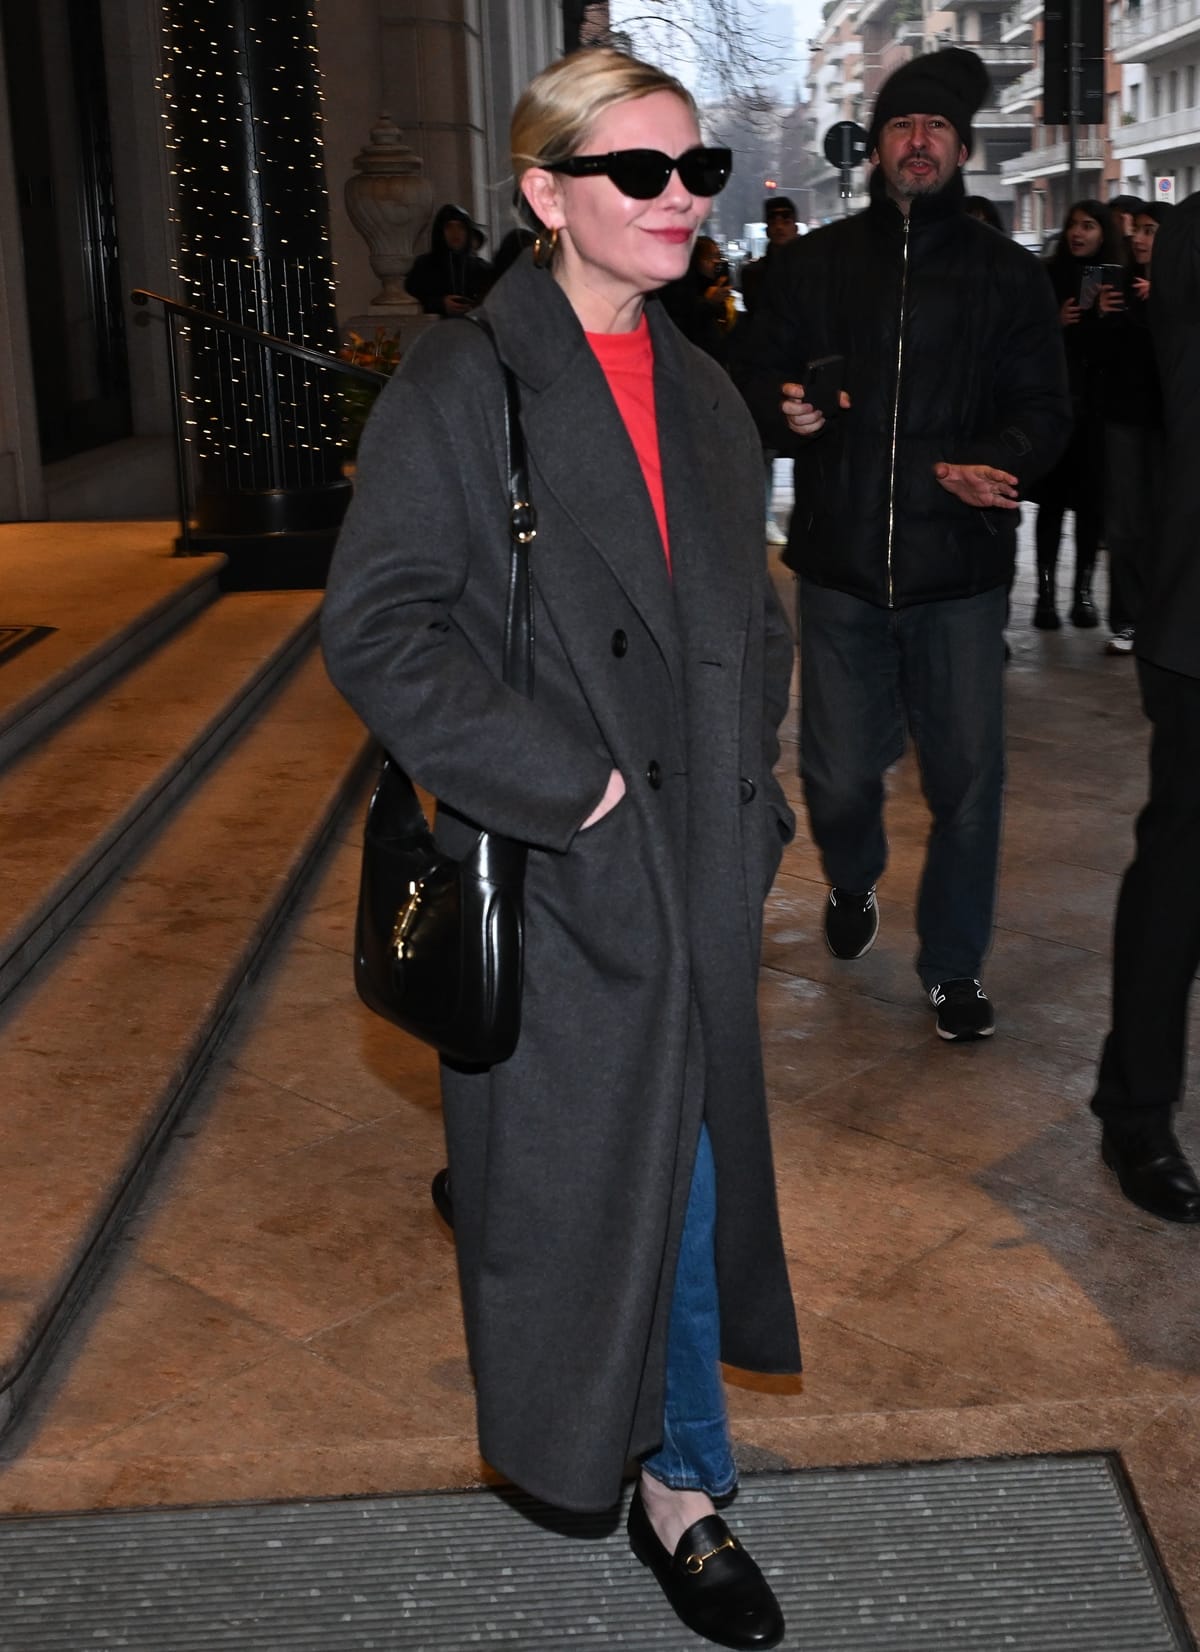 Dressed in a cozy crimson sweater tucked into navy wide-leg cropped jeans and layered with a long grey wool coat, Kirsten Dunst proves her fashion-forward sensibility